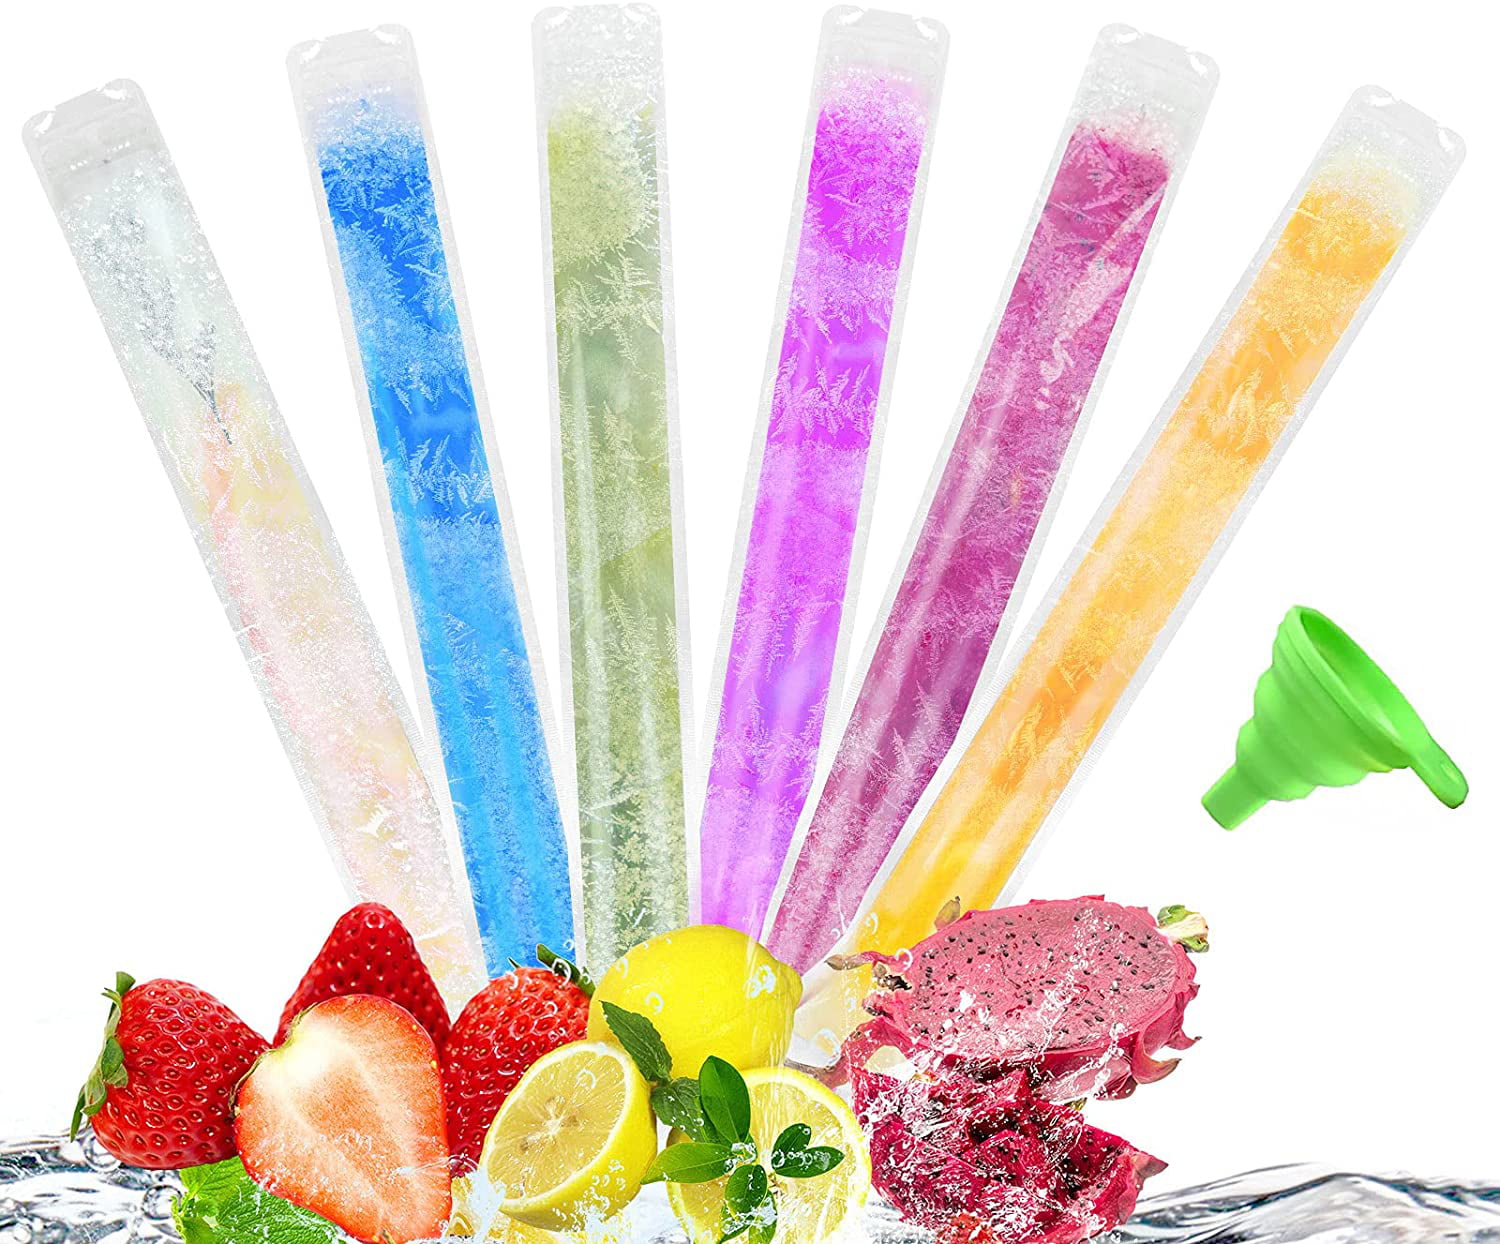 Yogurt Ice Candy Popsicle Bags Pouches Come with a Silicone Funnel 100 Pack Disposable DIY Ice Popsicle Mold Bags for Healthy Snacks Popsicle Bags 